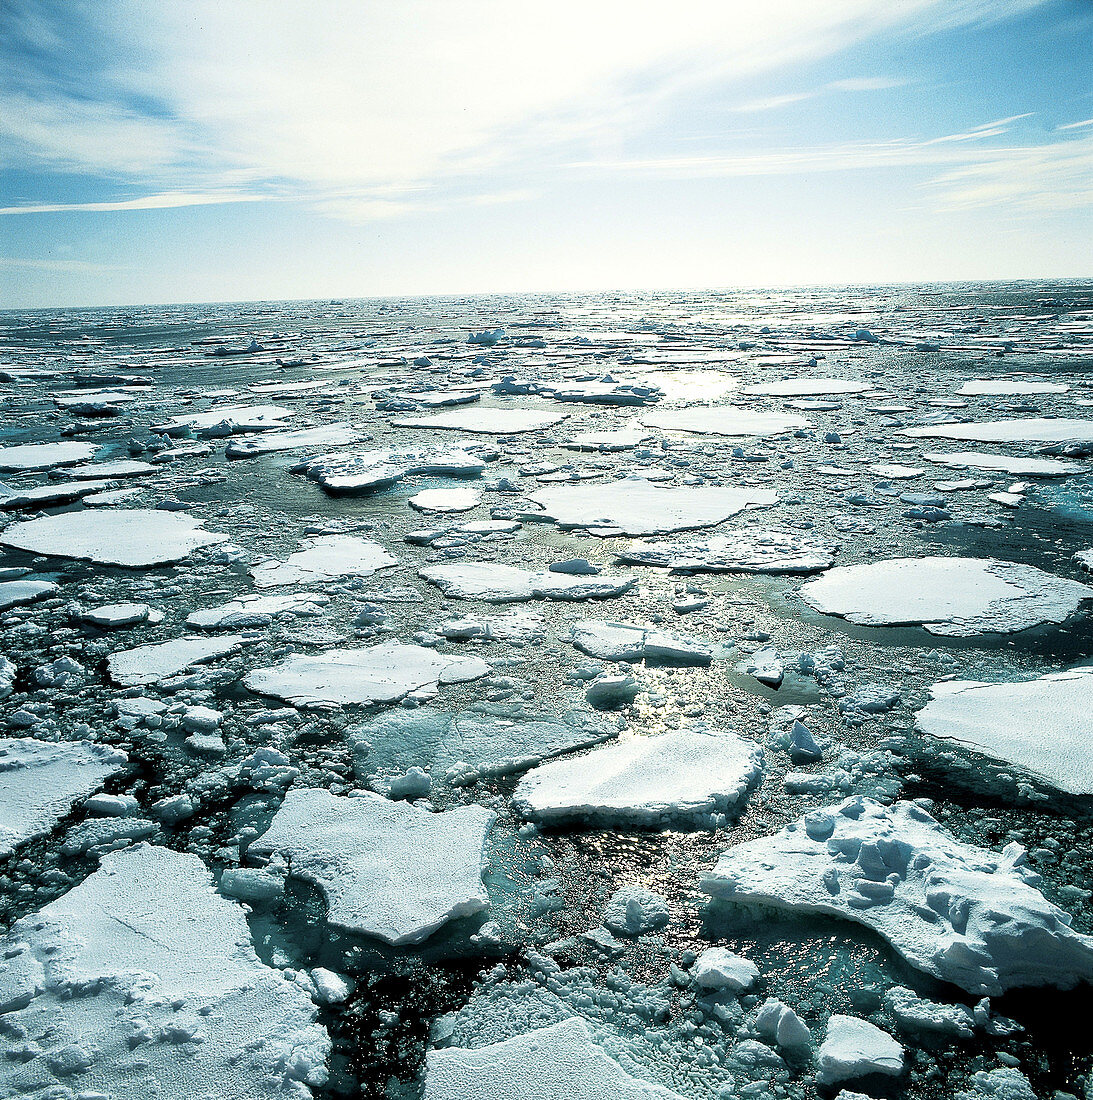 Pack Ice in the Ross Sea of Antarctica